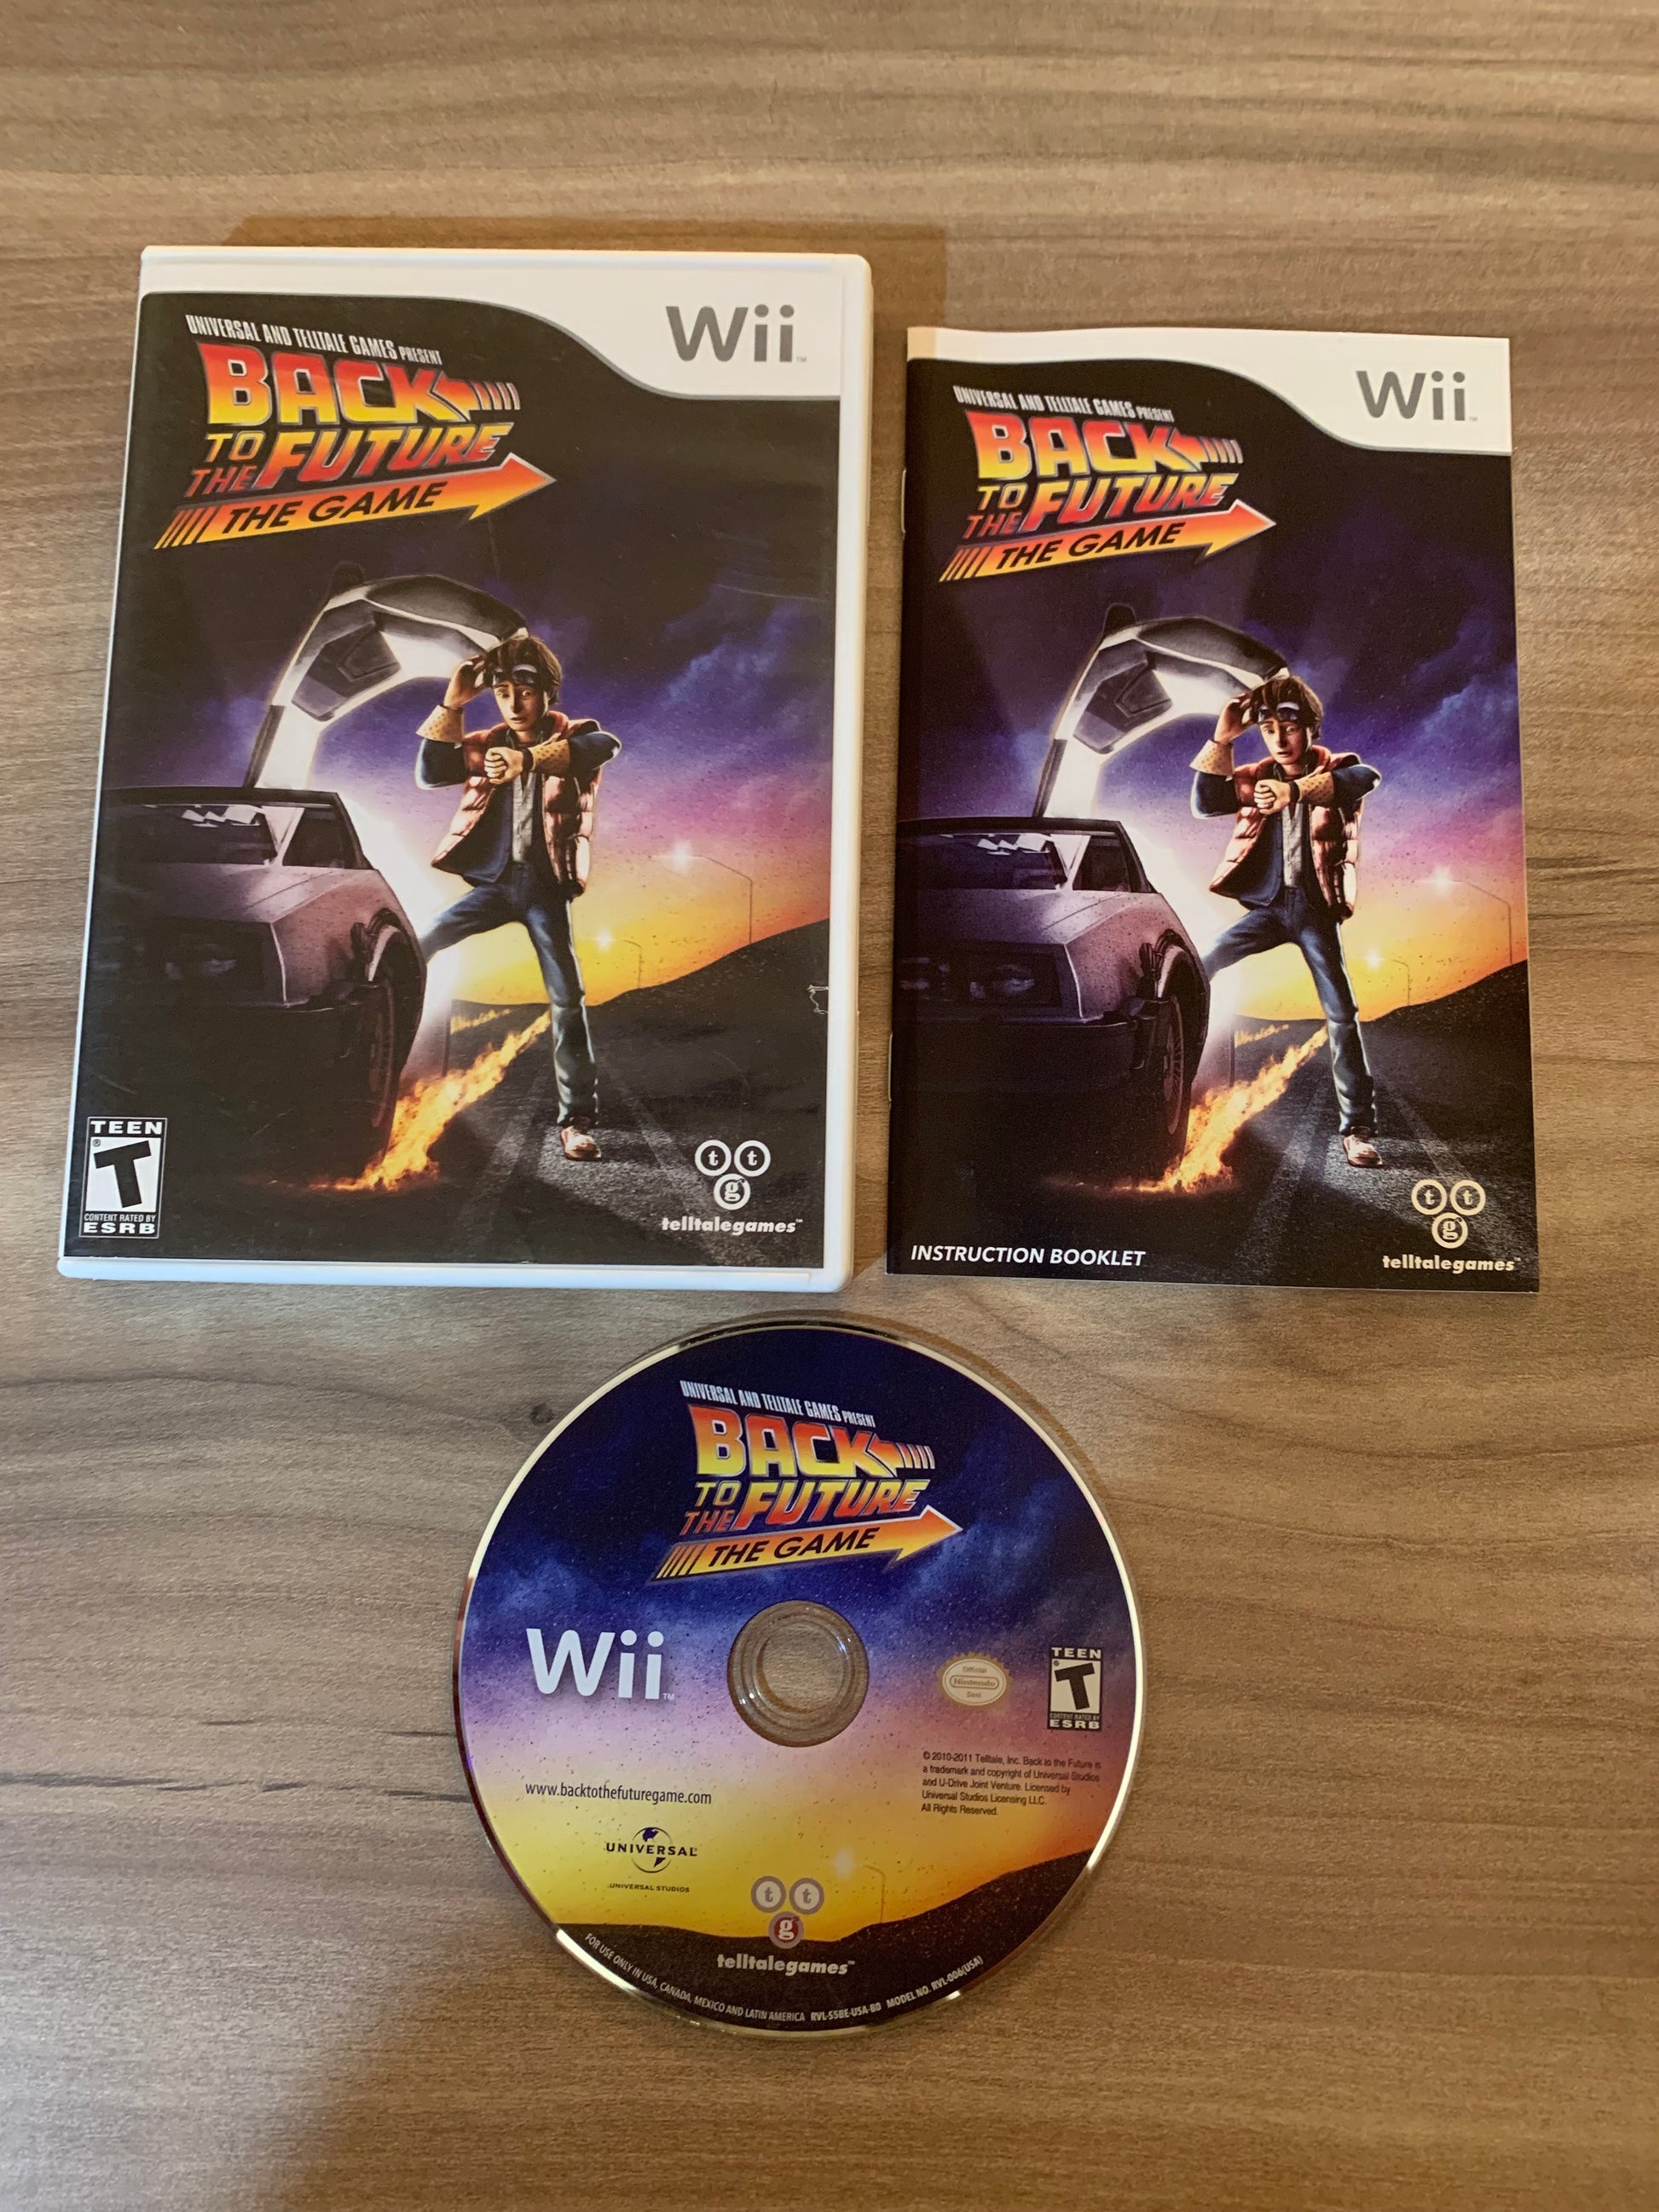 PiXEL-RETRO.COM : NINTENDO WII COMPLET CIB BOX MANUAL GAME NTSC BACK TO THE FURURE THE GAME